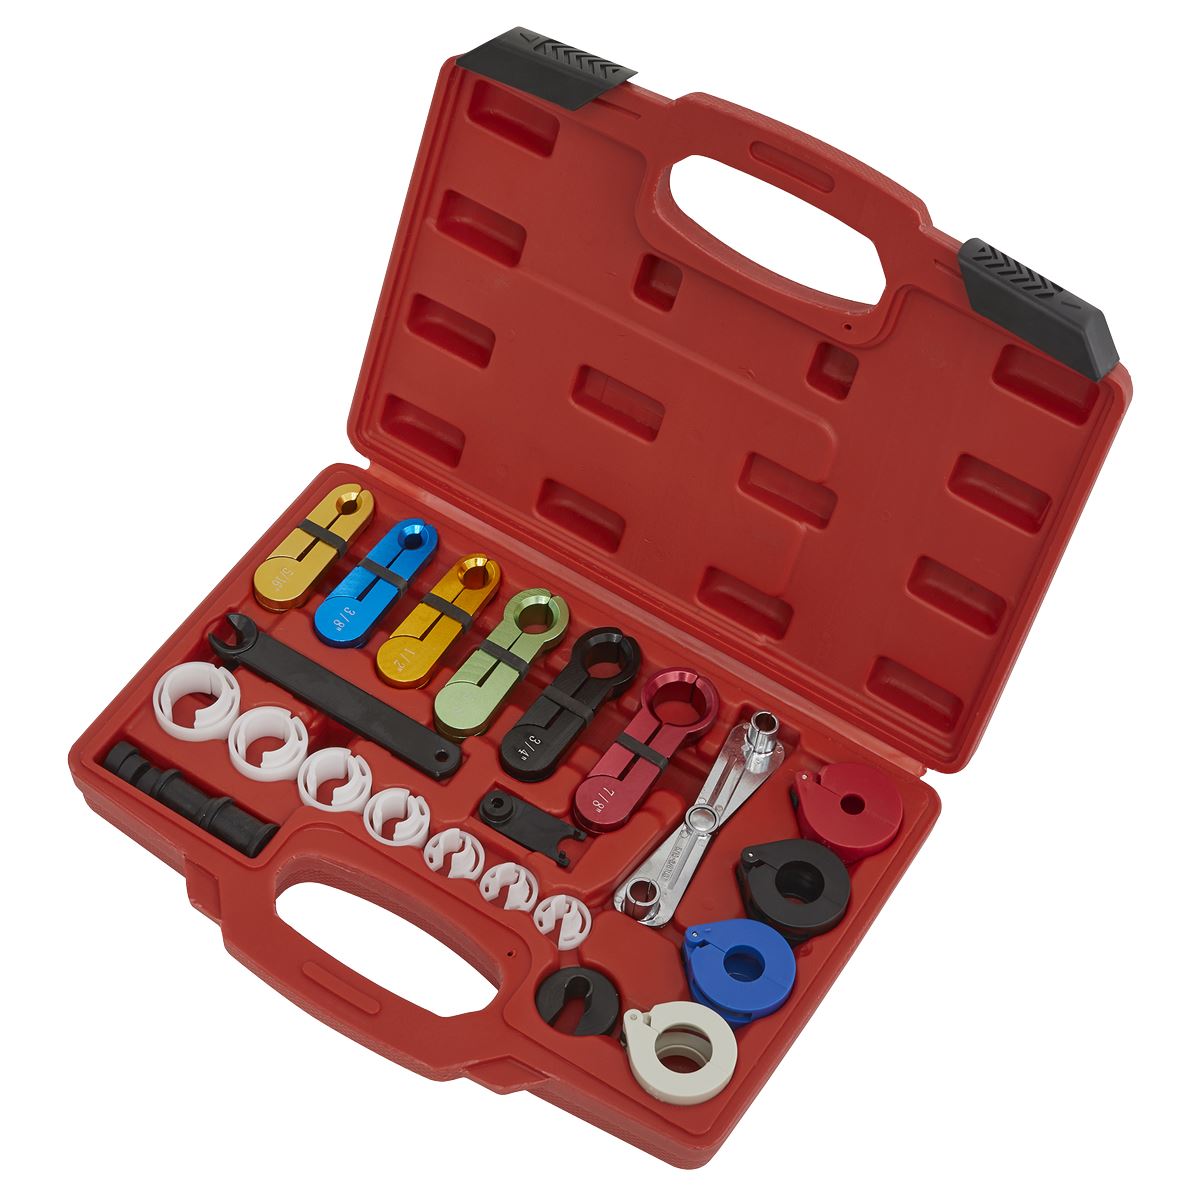 Sealey Fuel & Air Conditioning Disconnection Tool Kit 21pc